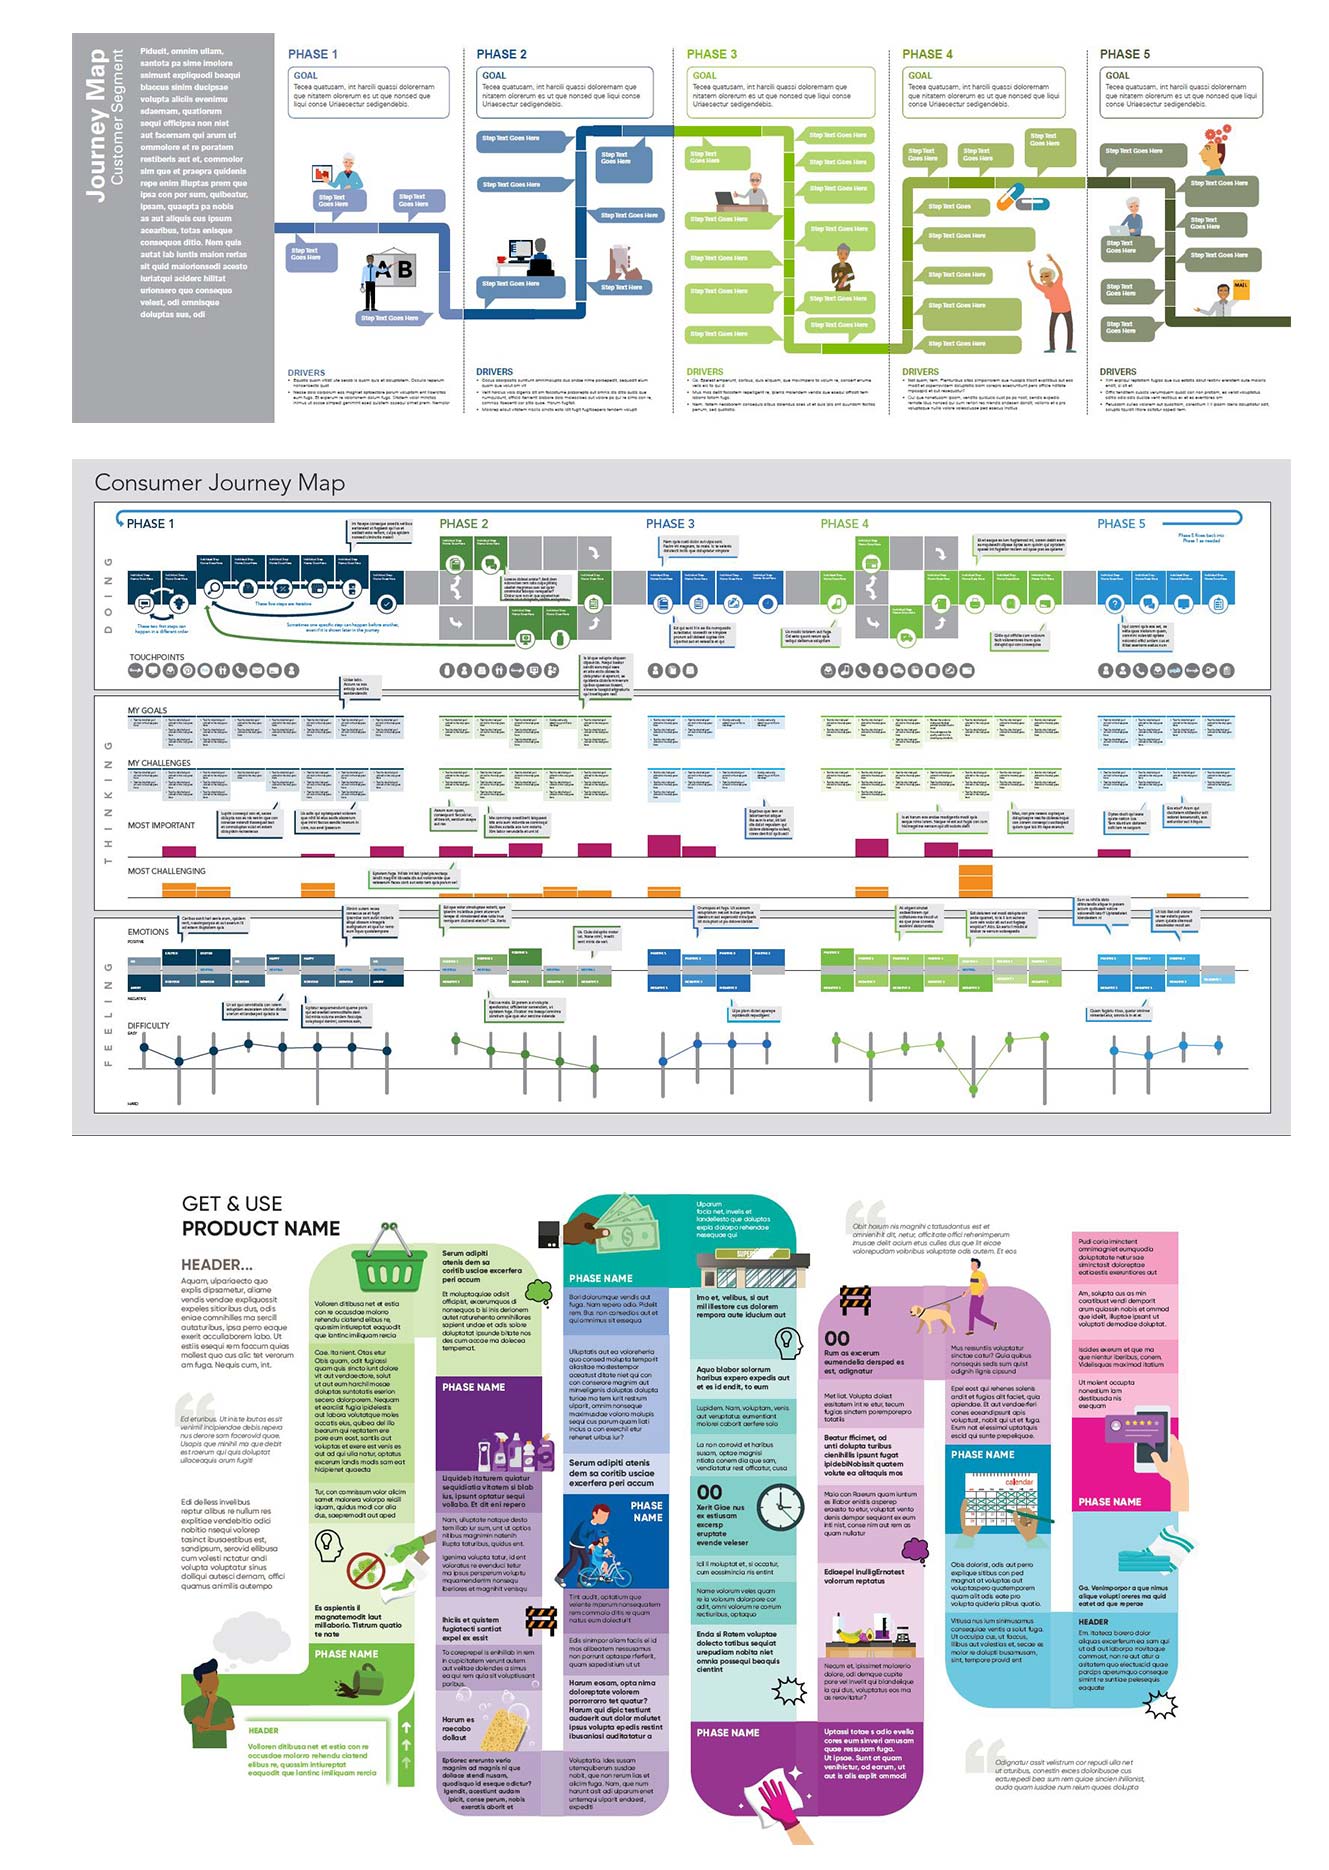 Your customer journey map